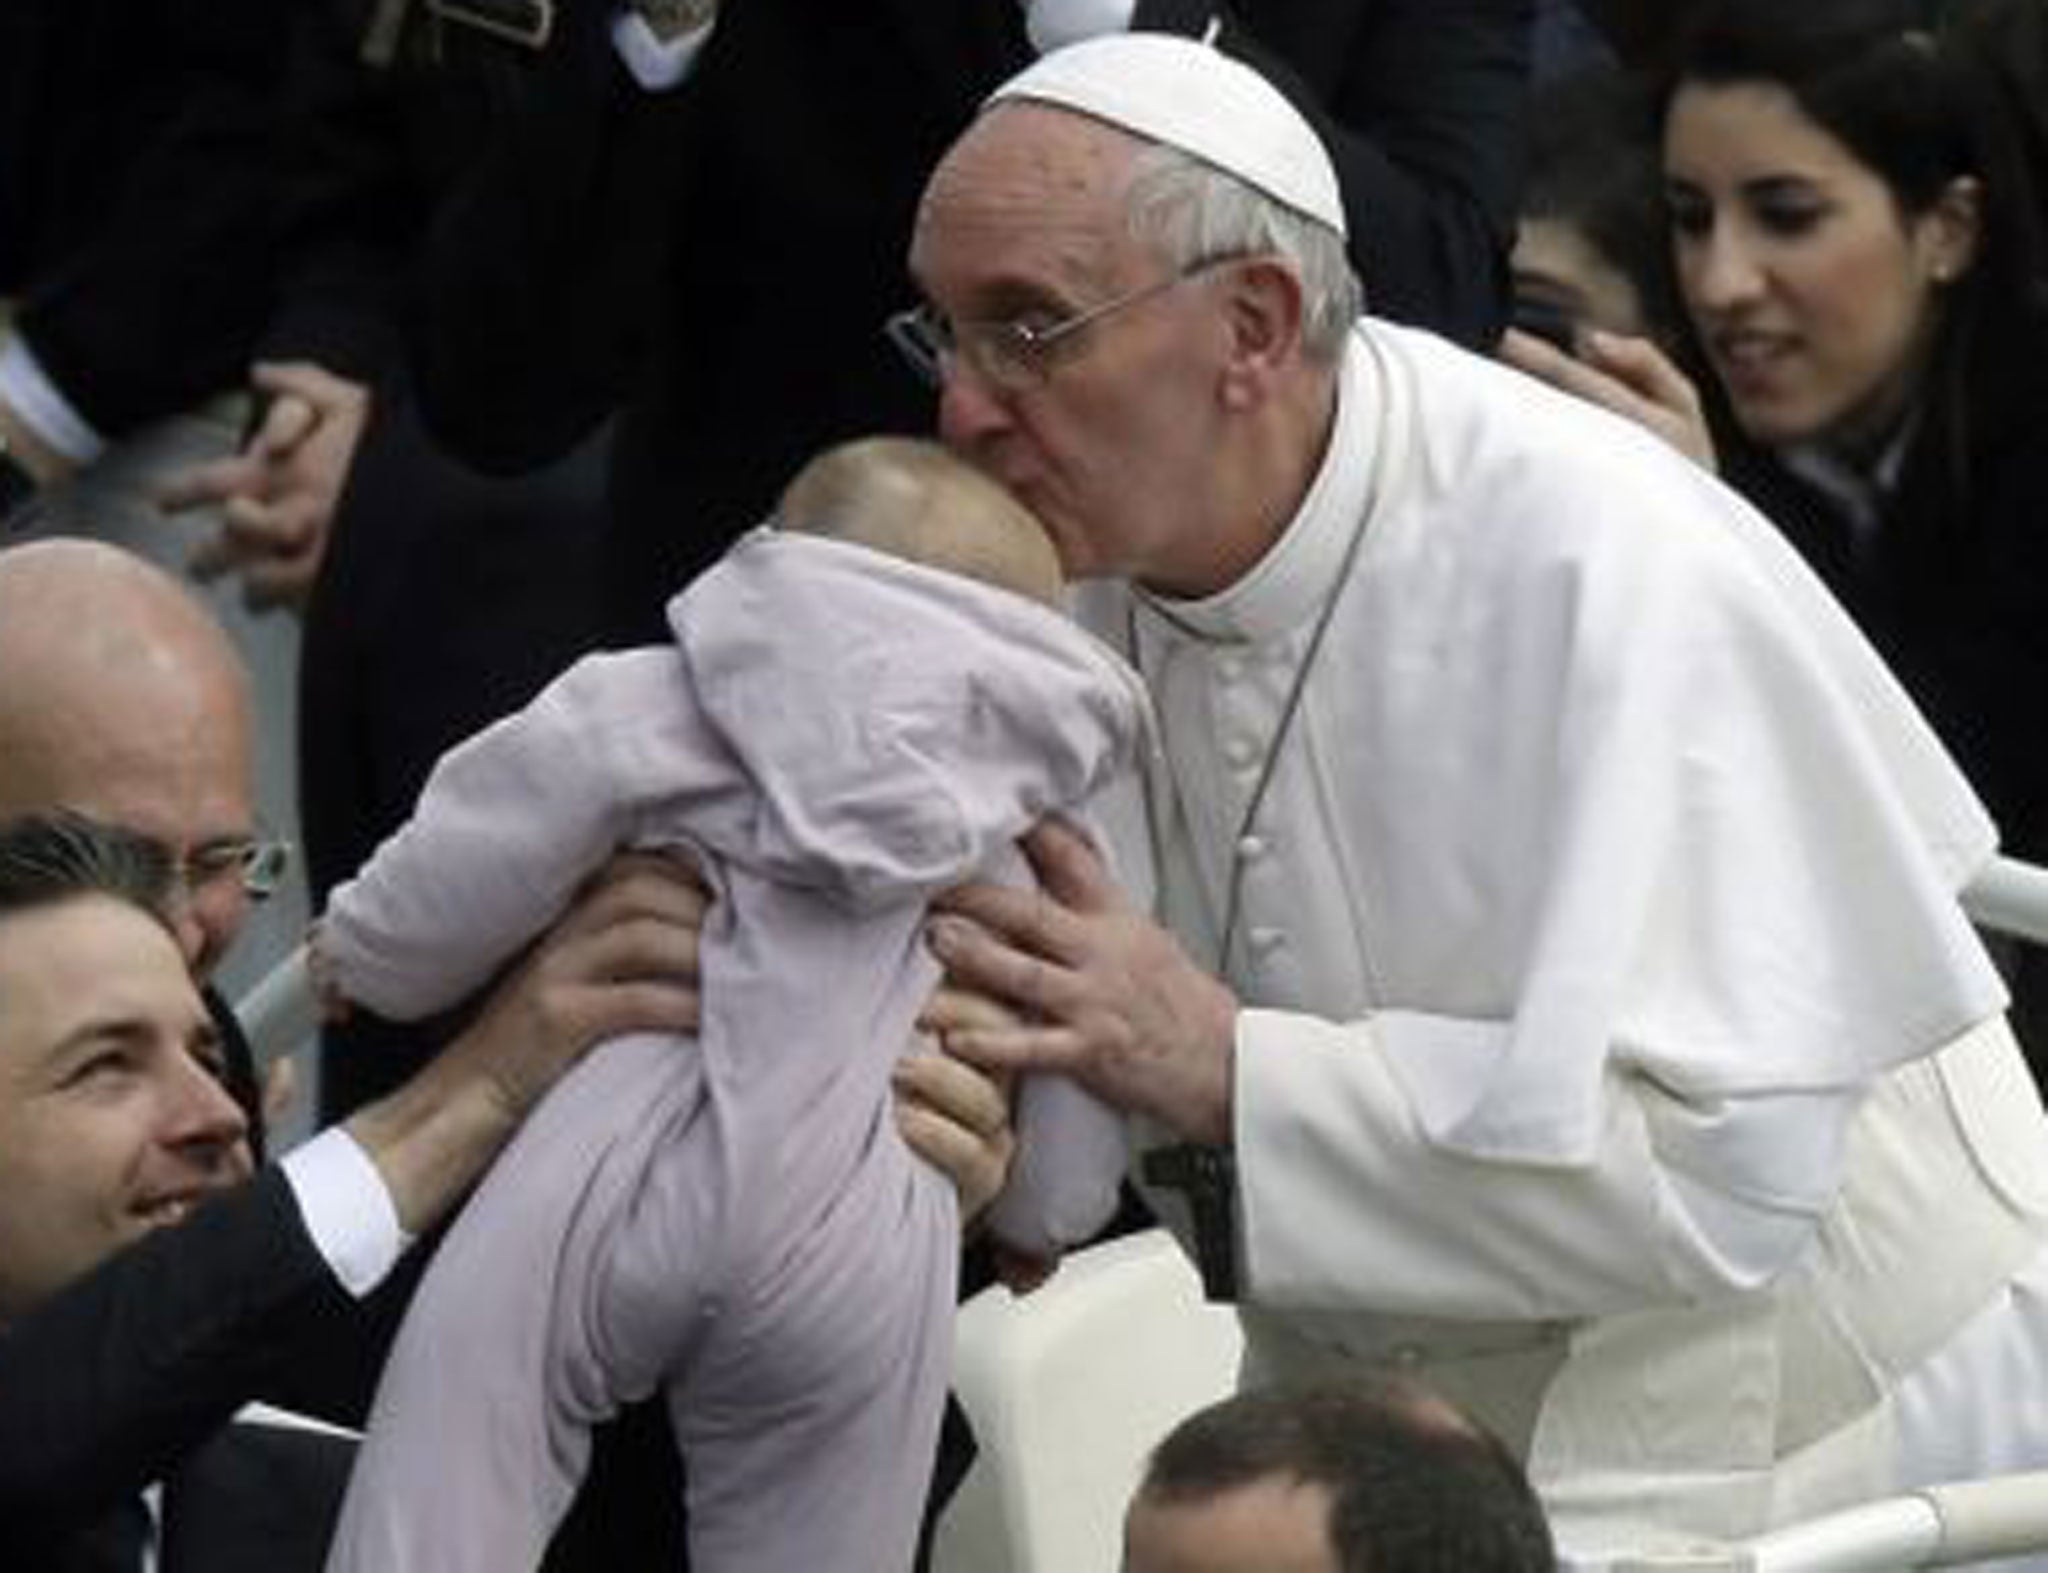 Pope Francis kisses a baby after his first Easter Sunday message